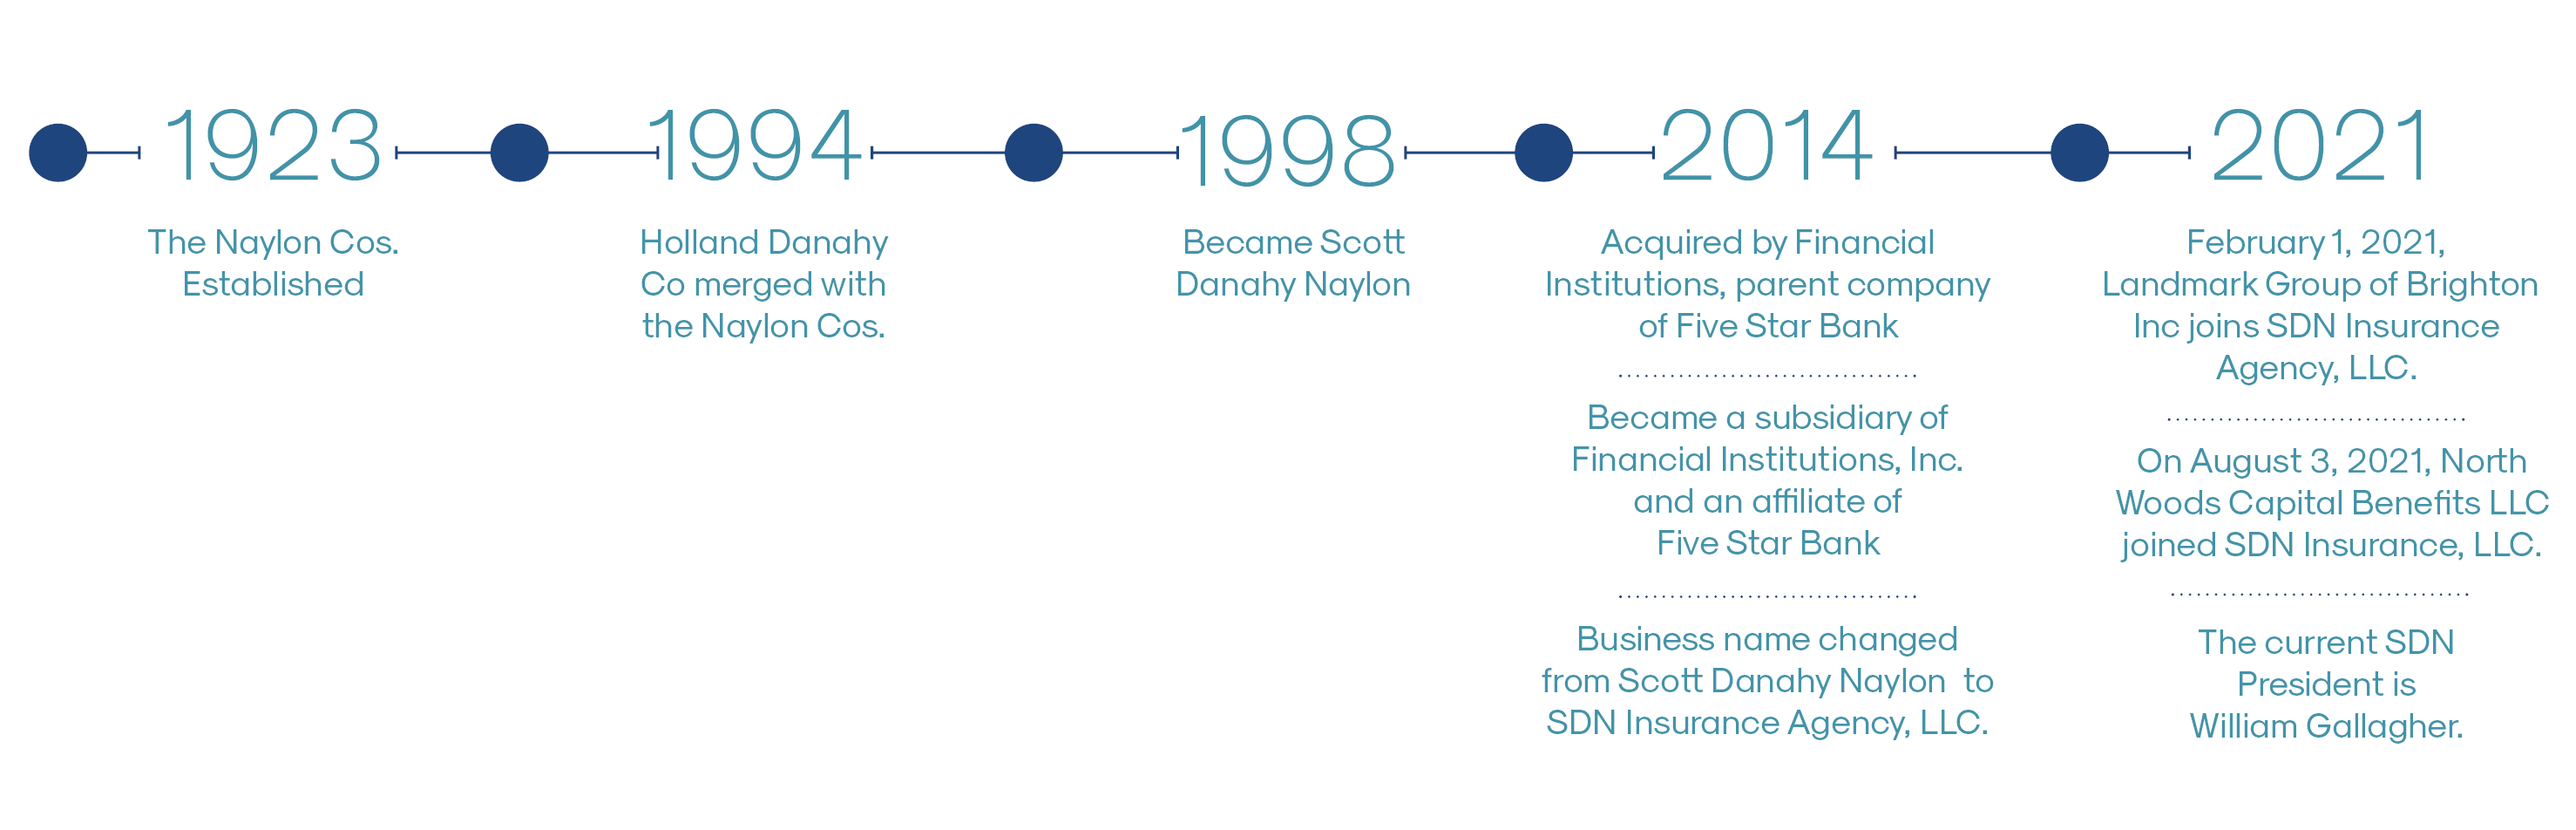 timeline of SDN company